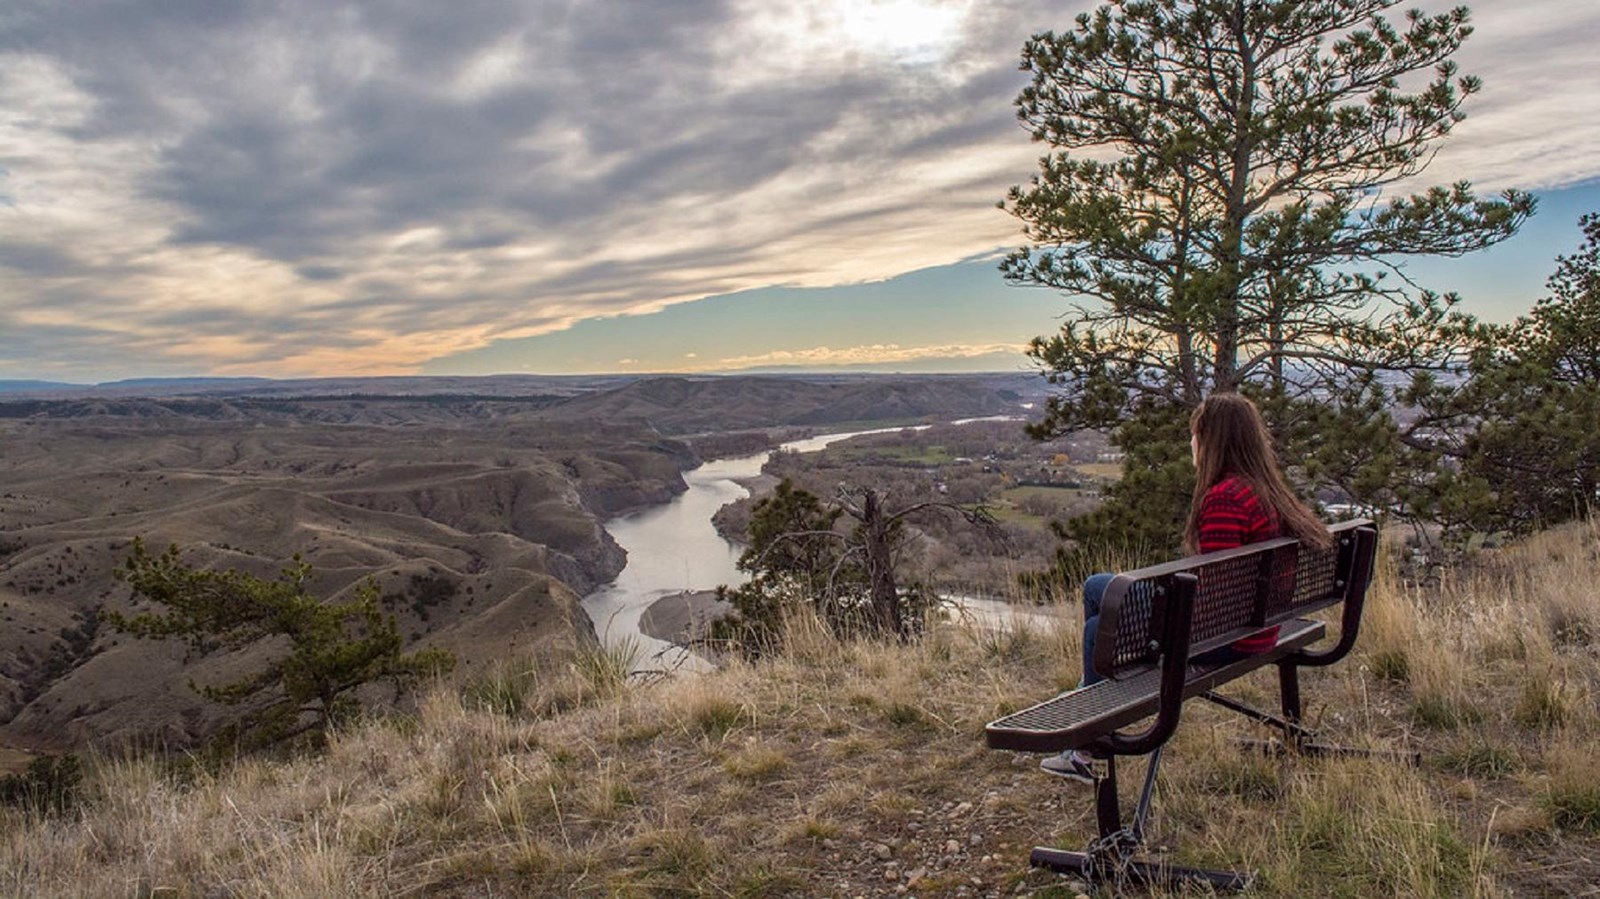 A woman sits on a bench overlooking bluffs and a river below